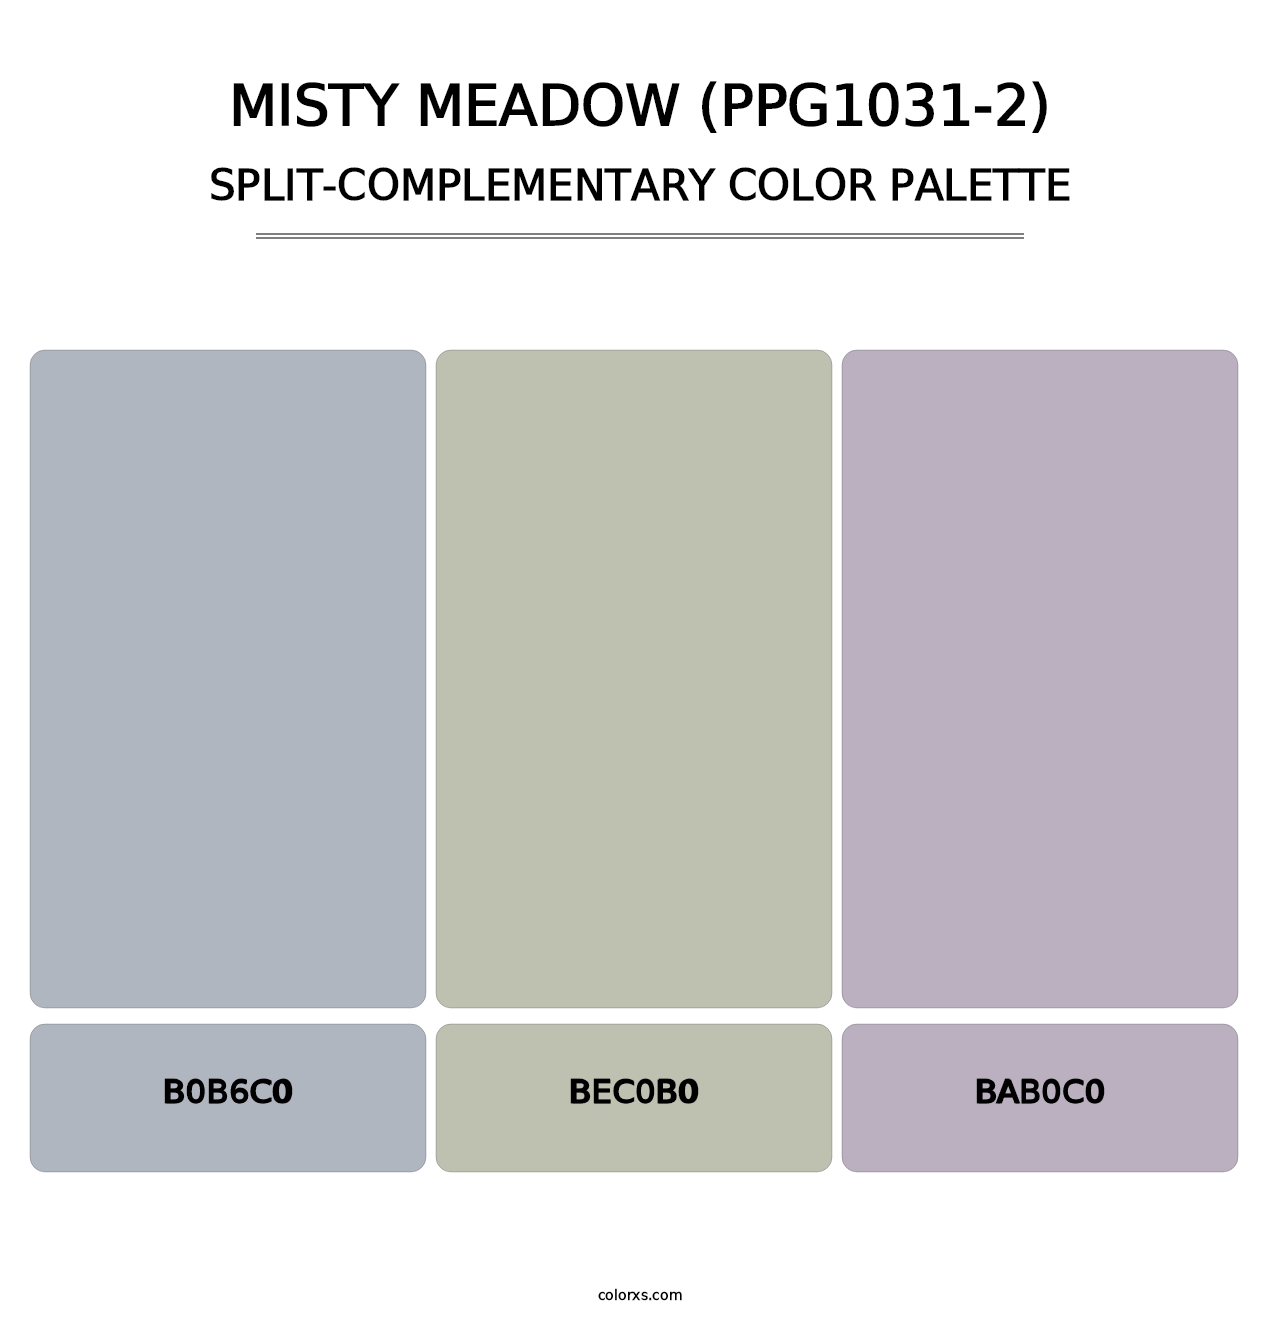 Misty Meadow (PPG1031-2) - Split-Complementary Color Palette